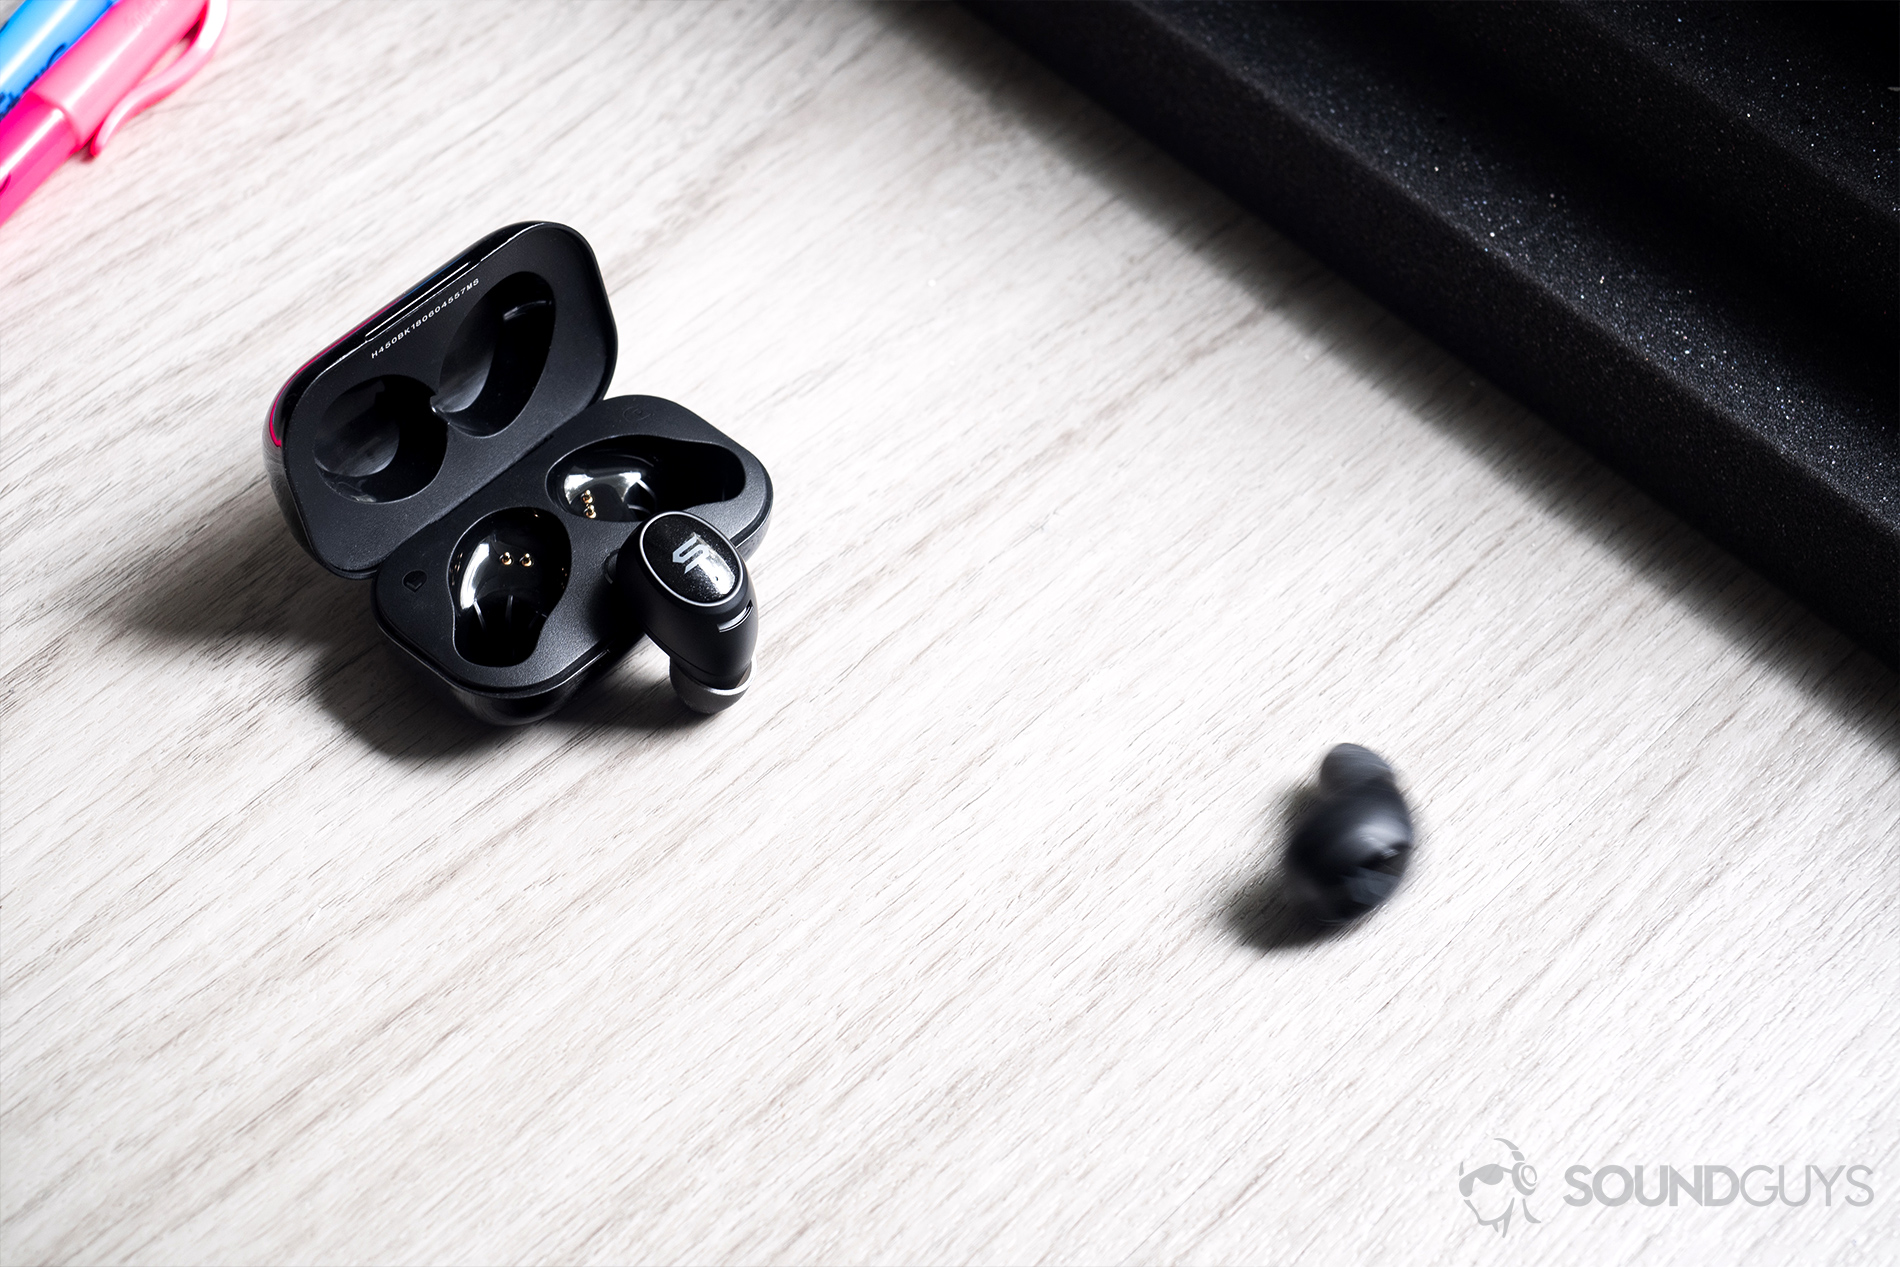 Soul Emotion: Downward angled image of one of the earbuds resting against the case (open) with the other rolling and blurred in the frame.